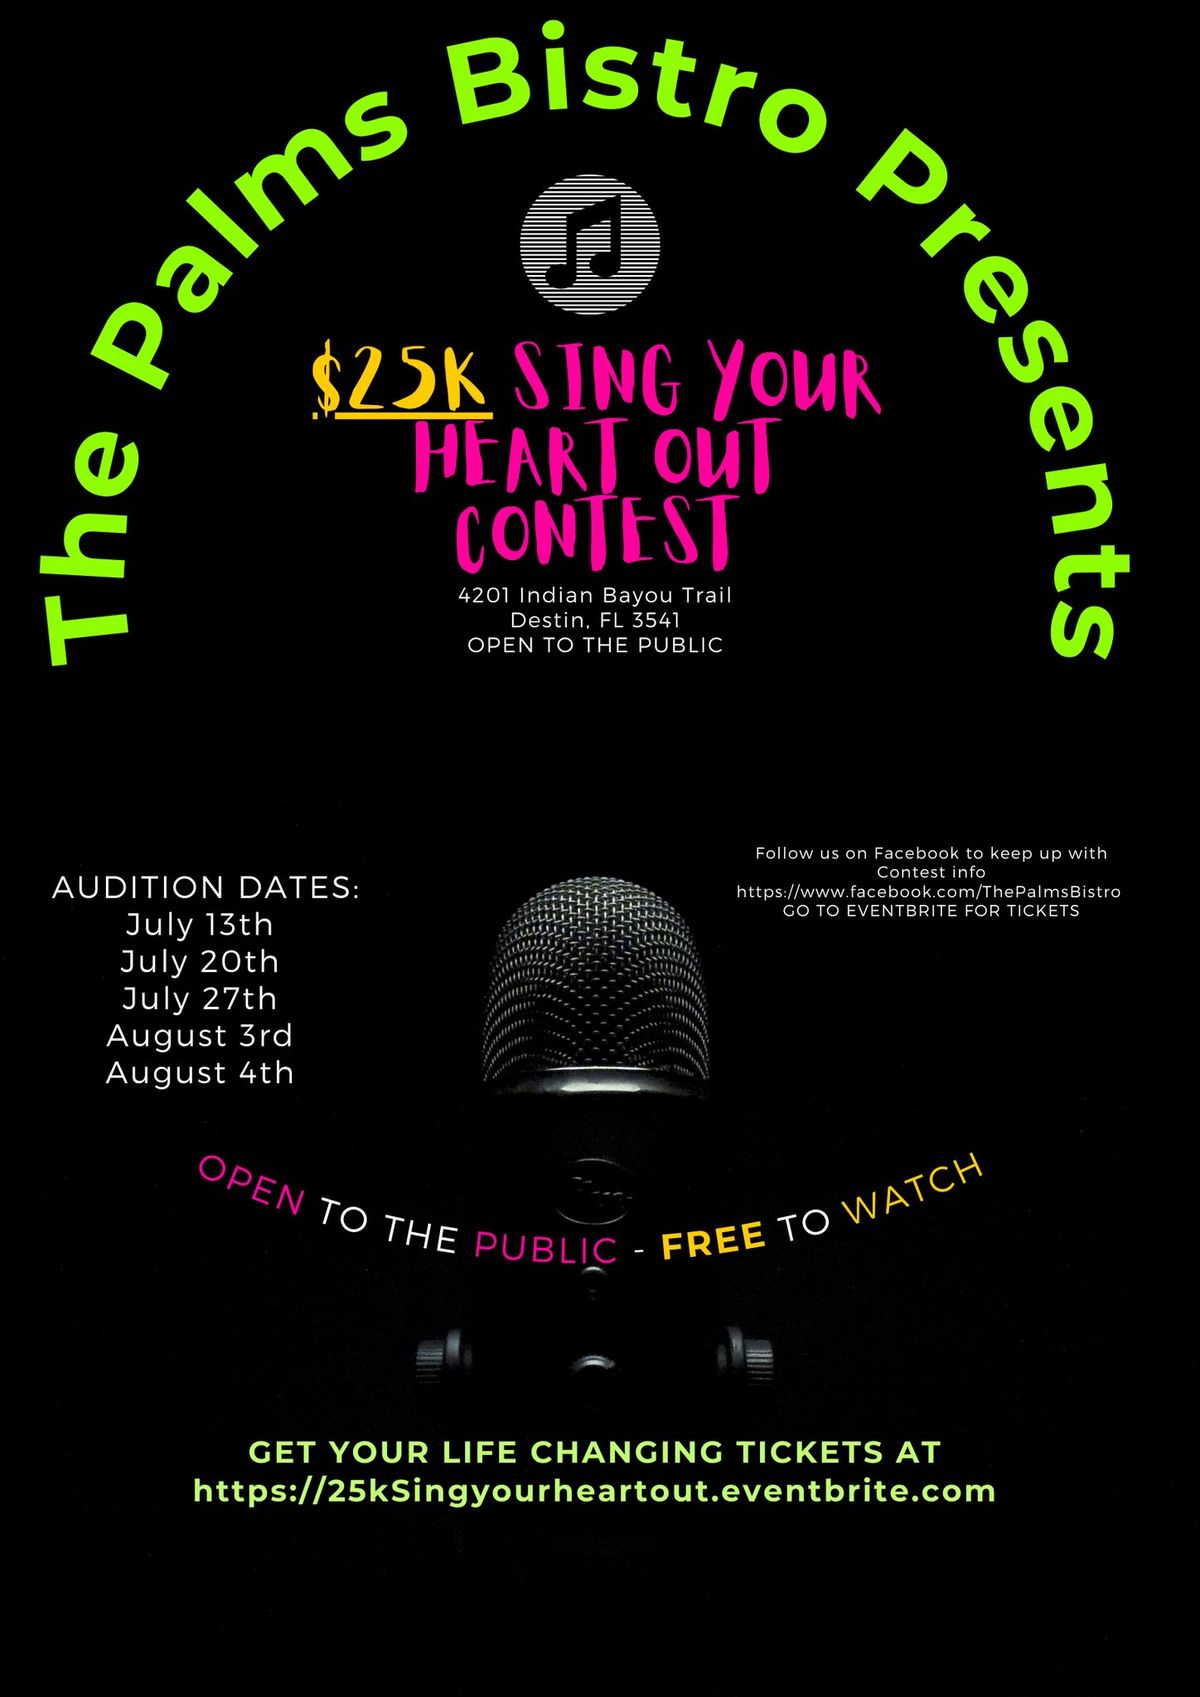 $25k Sing Your Heart Out Contest